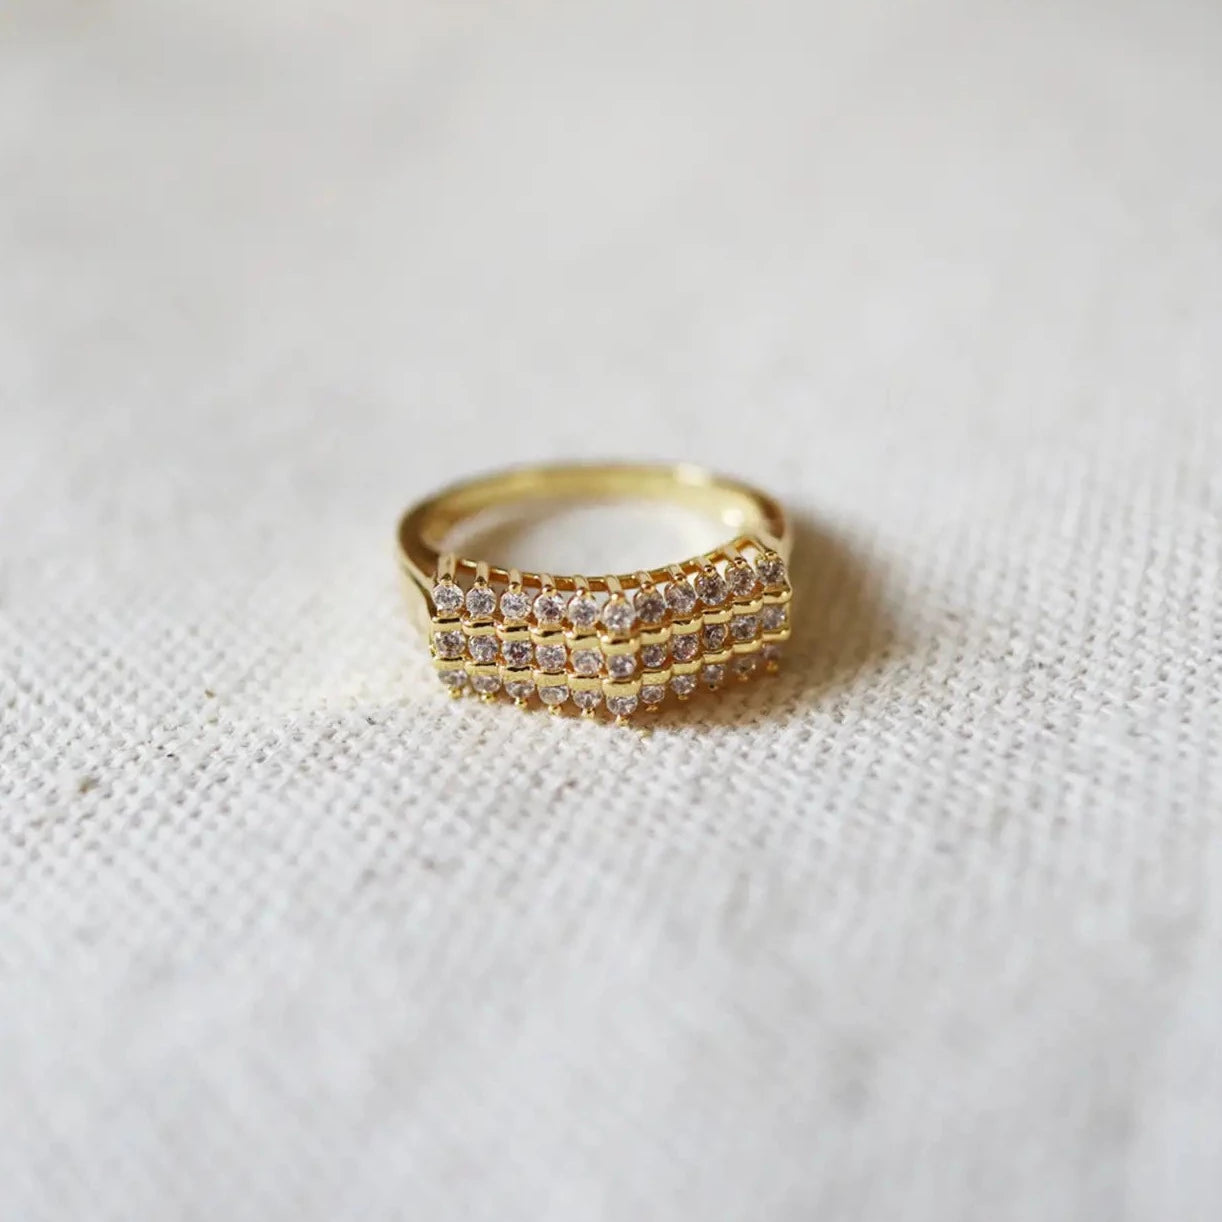 West Native Jewelry Temple Ring | Prelude & Dawn | Los Angeles